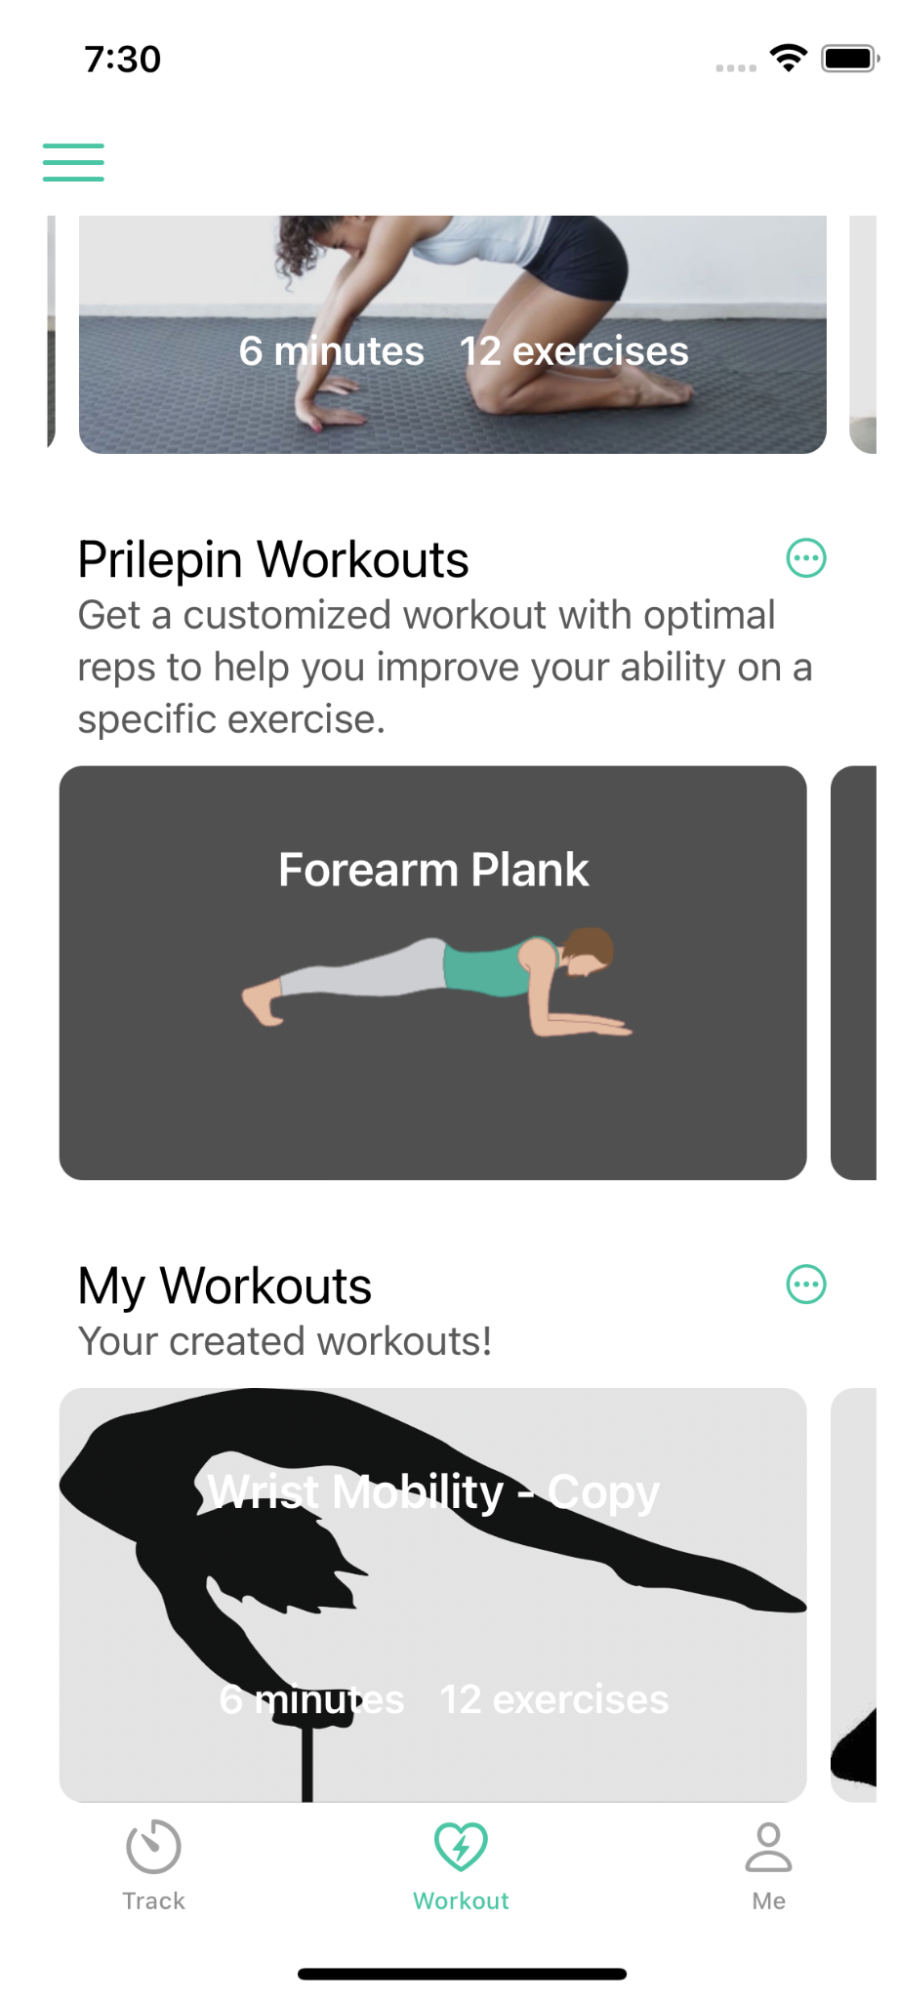 Your Workout showing in Workout tab